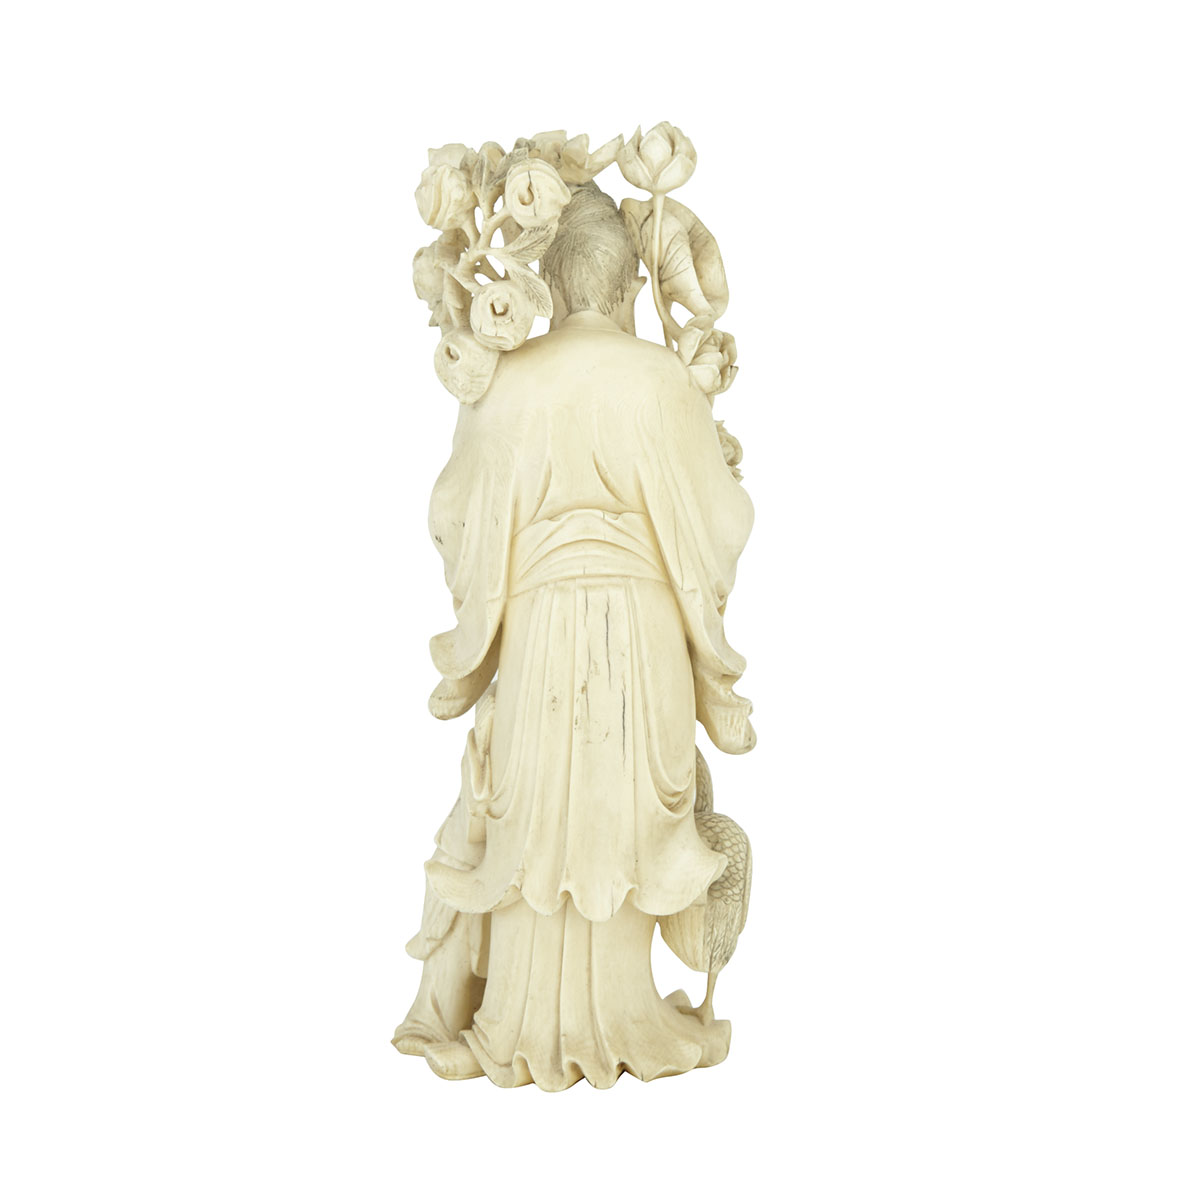 Carved Ivory Chinese Figure with Lotus Blossoms, Circa 1920